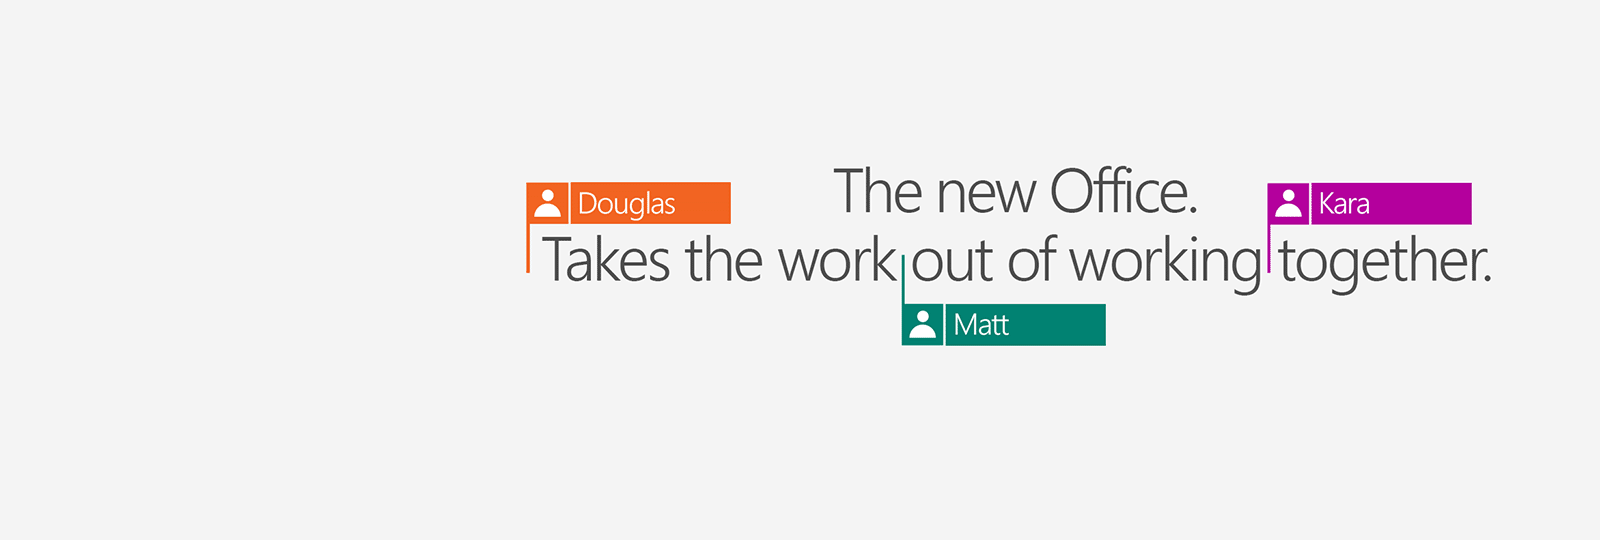 Buy Office 365 to get the new 2016 apps.